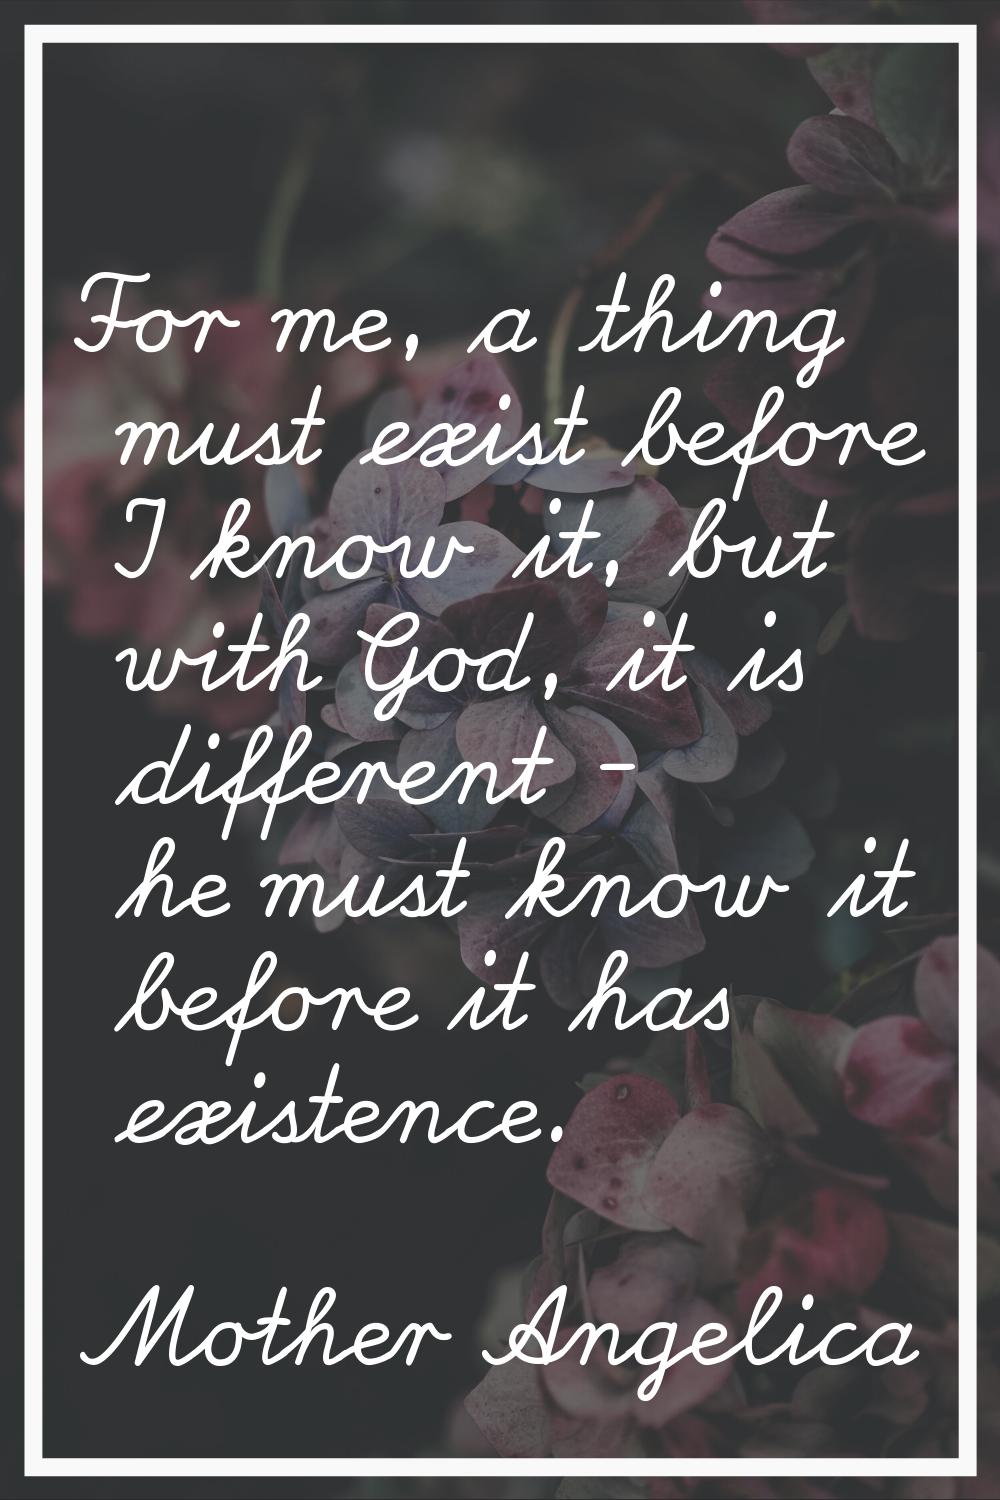 For me, a thing must exist before I know it, but with God, it is different - he must know it before